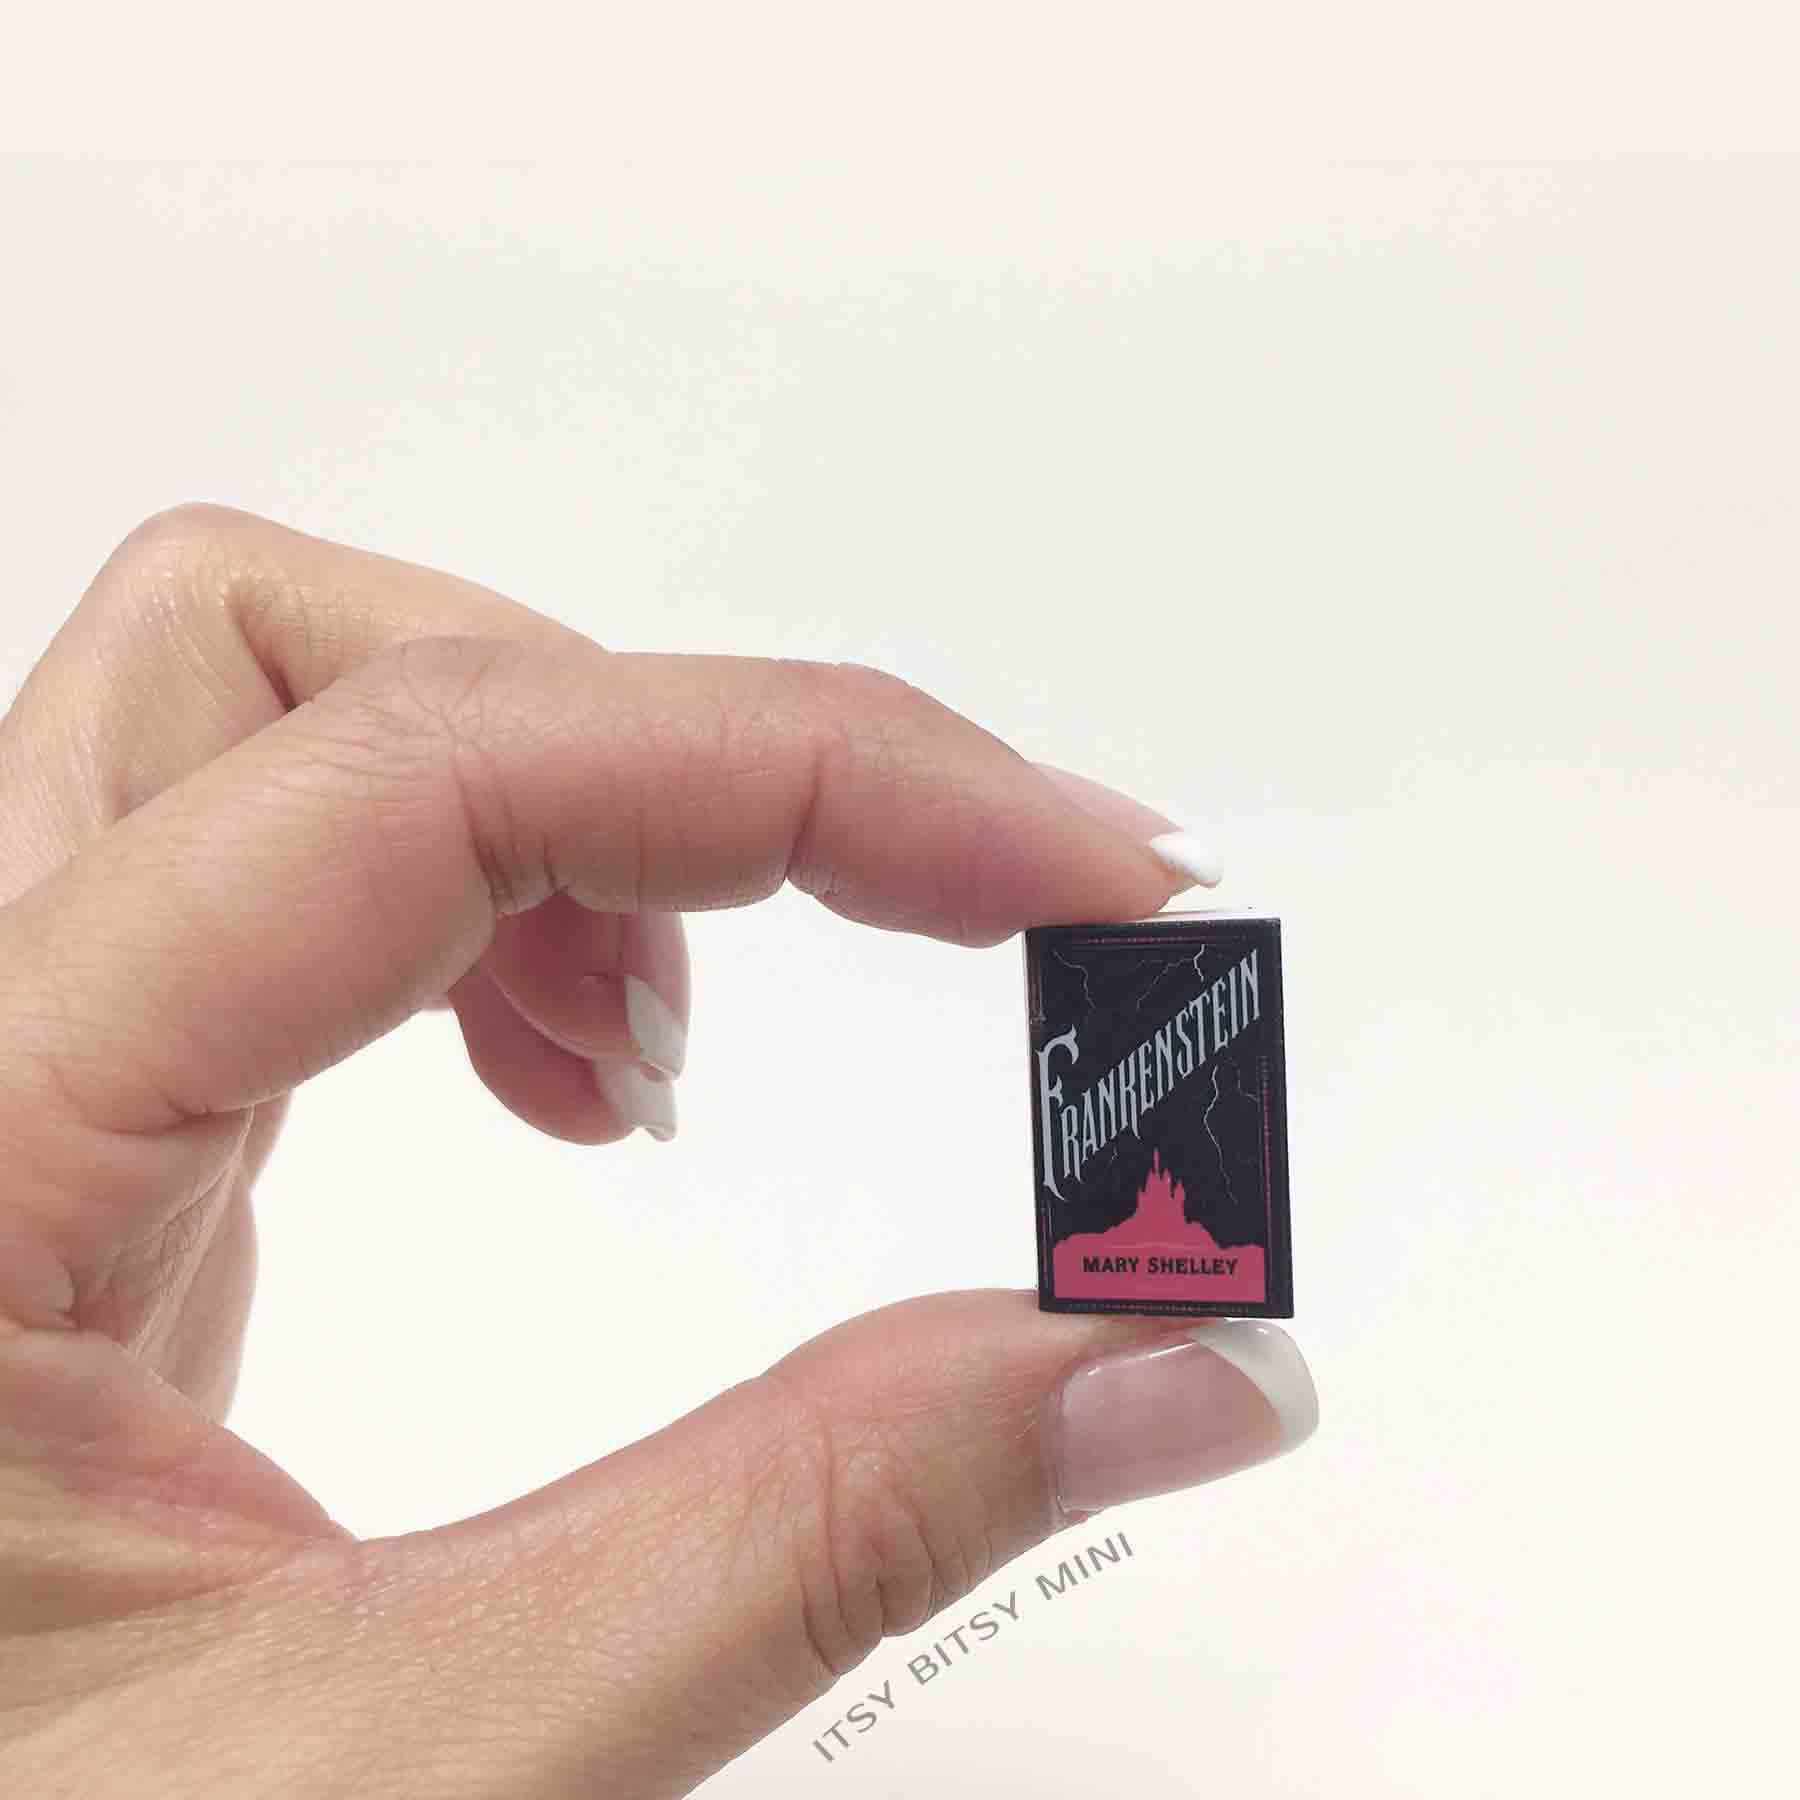 Dollhouse Micro Miniature Book with Readable Pages